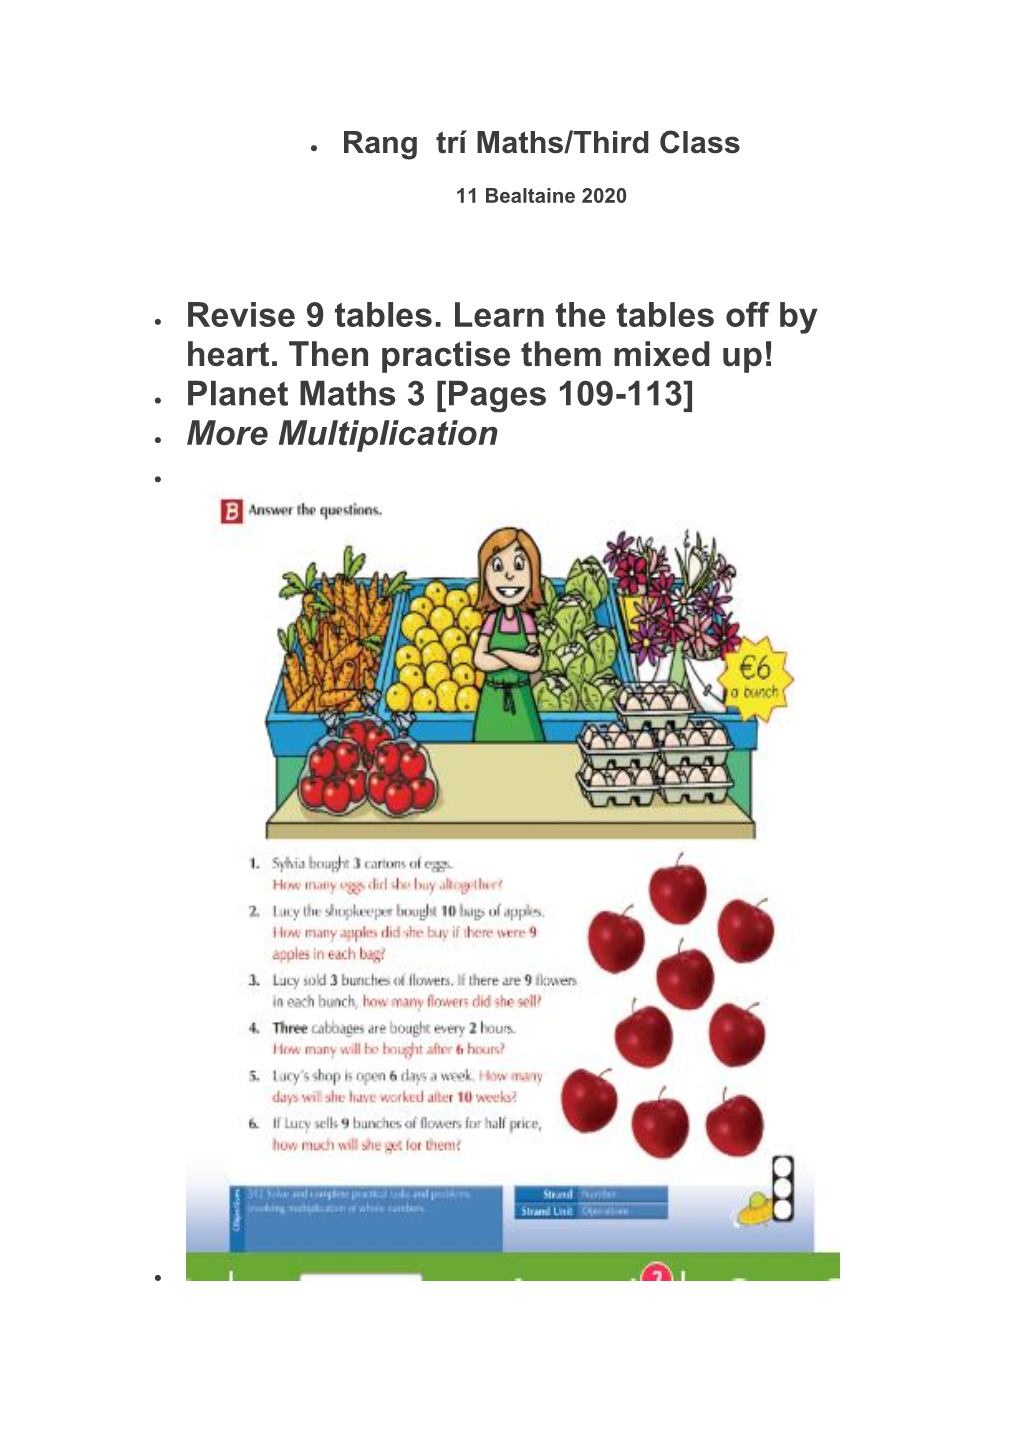 Planet Maths 3 [Pages 109-113] • More Multiplication •